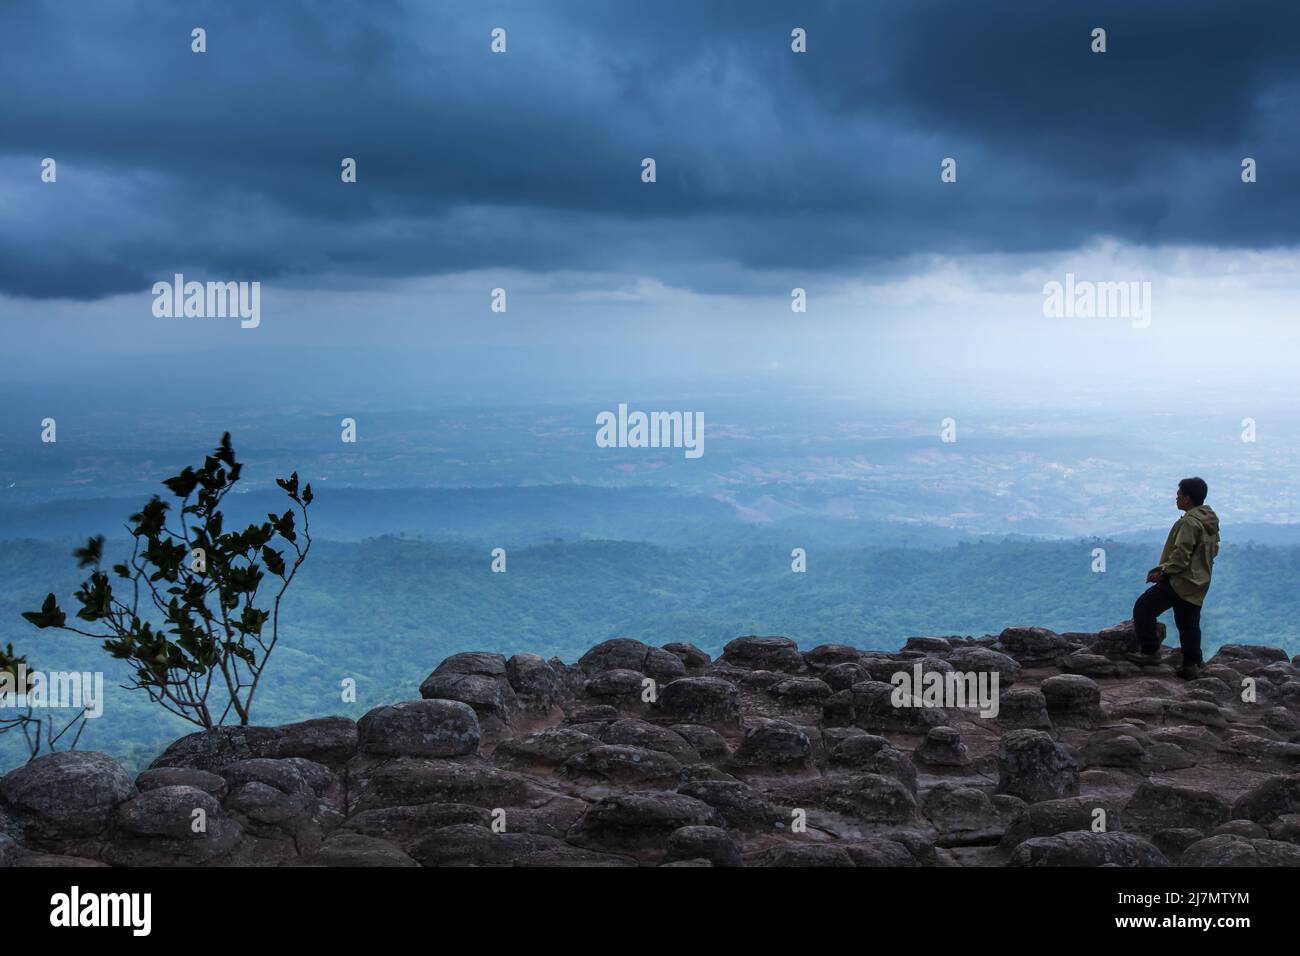 A man in a rain jacket stands on the edge of a cliff and looks at the dark rain clouds over the mountains, rock formations that occurred by nature. Stock Photo